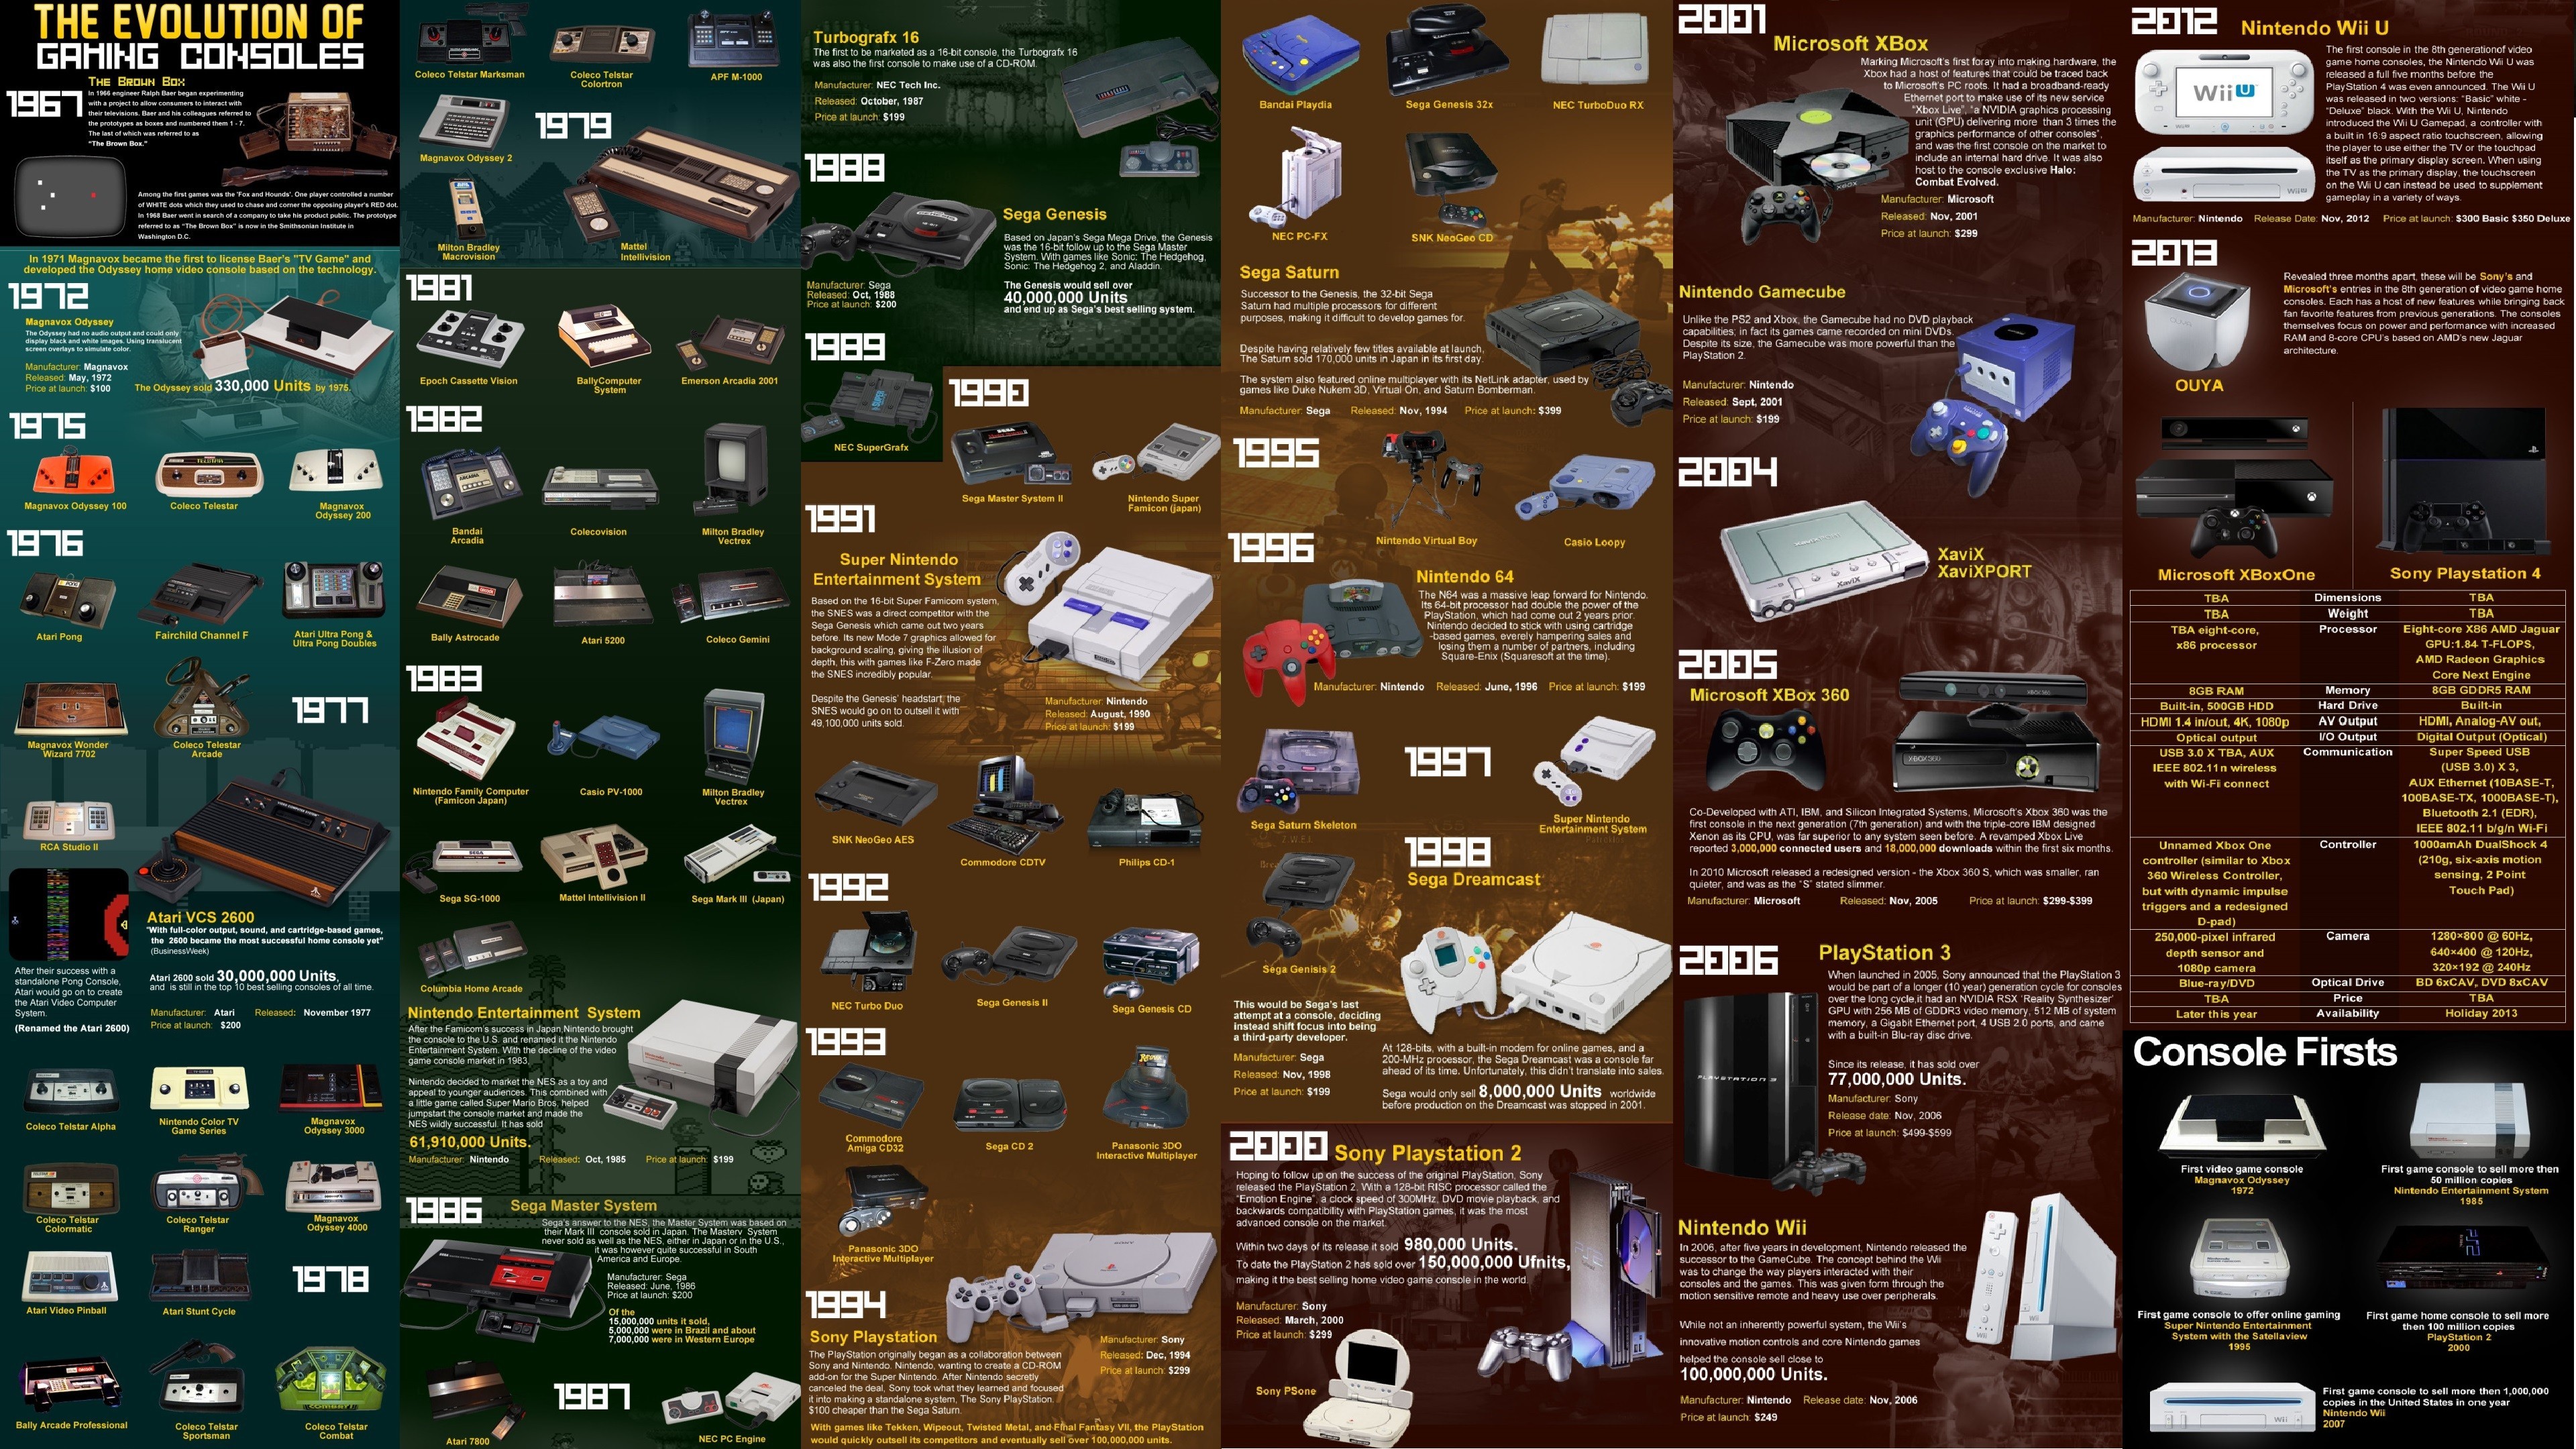 Evolution Of Gaming Consoles - HD Wallpaper 